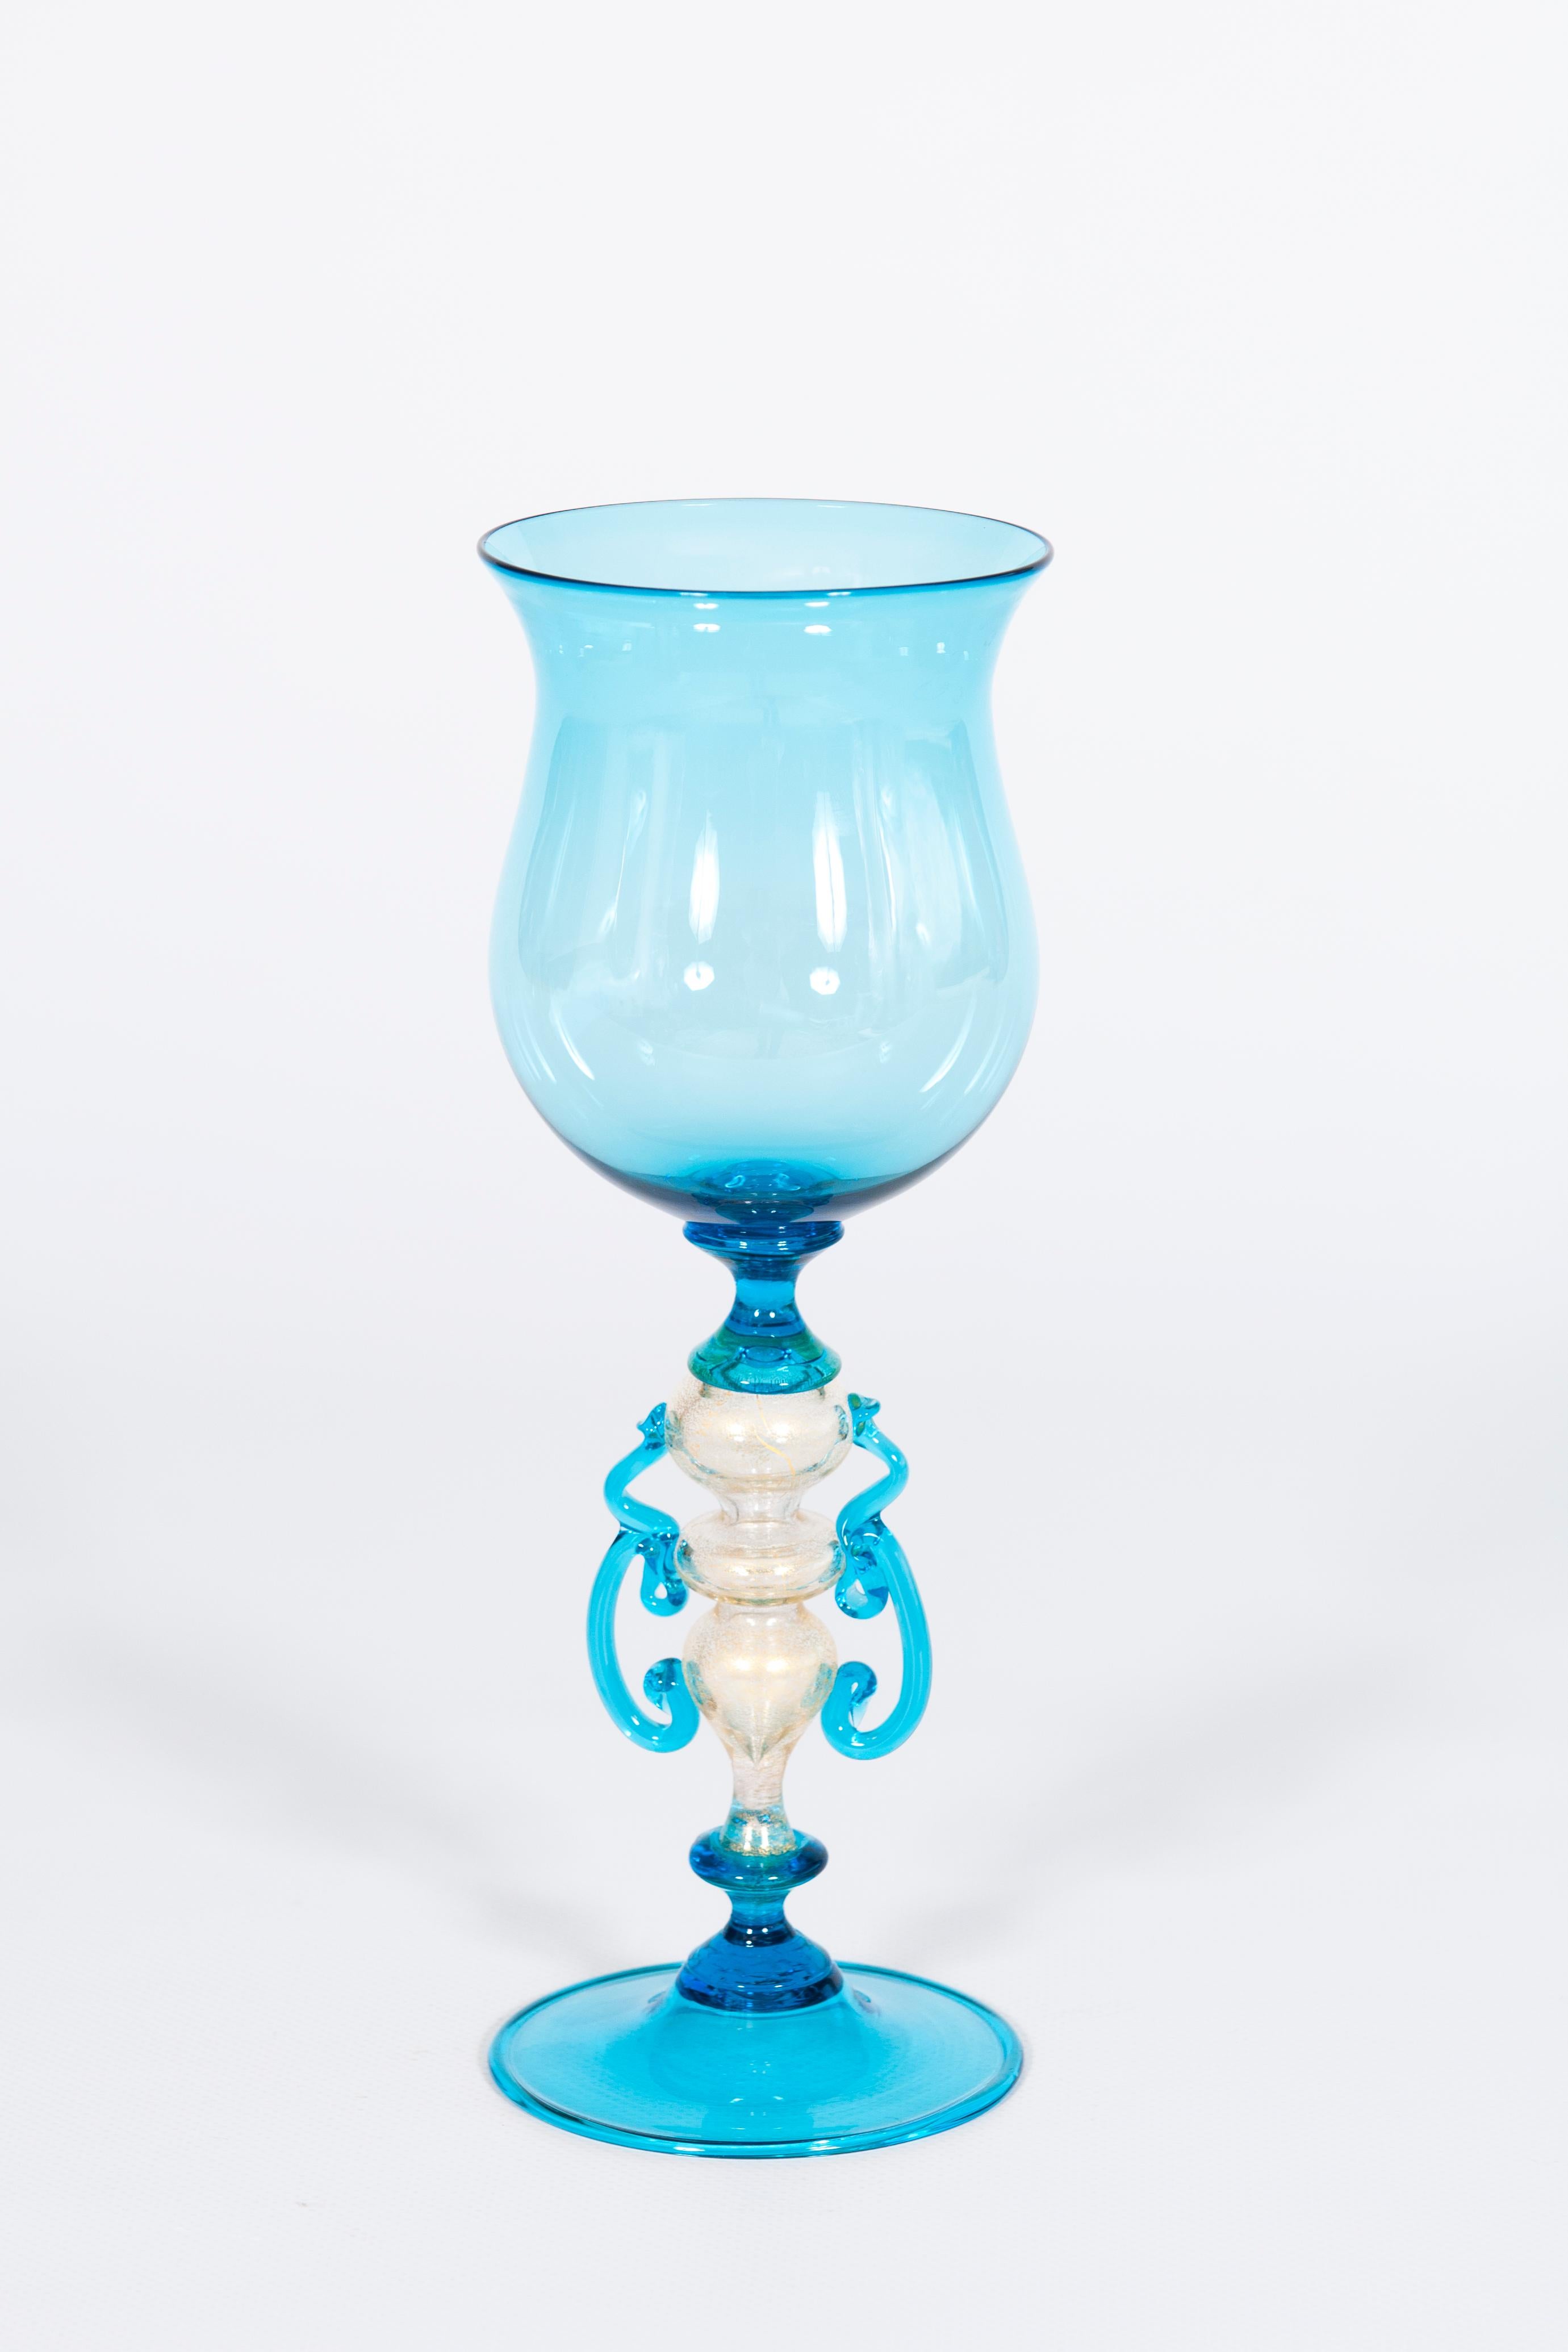 Sky Blue Stem Glass in Blown Murano Glass and Gold Leaf 1990s Venice Italy.
Entirely handcrafted in the 1990s, this sophisticated stem glass is the result of the finest Murano blown glass technique. It is probably to be attributed to the Venetian